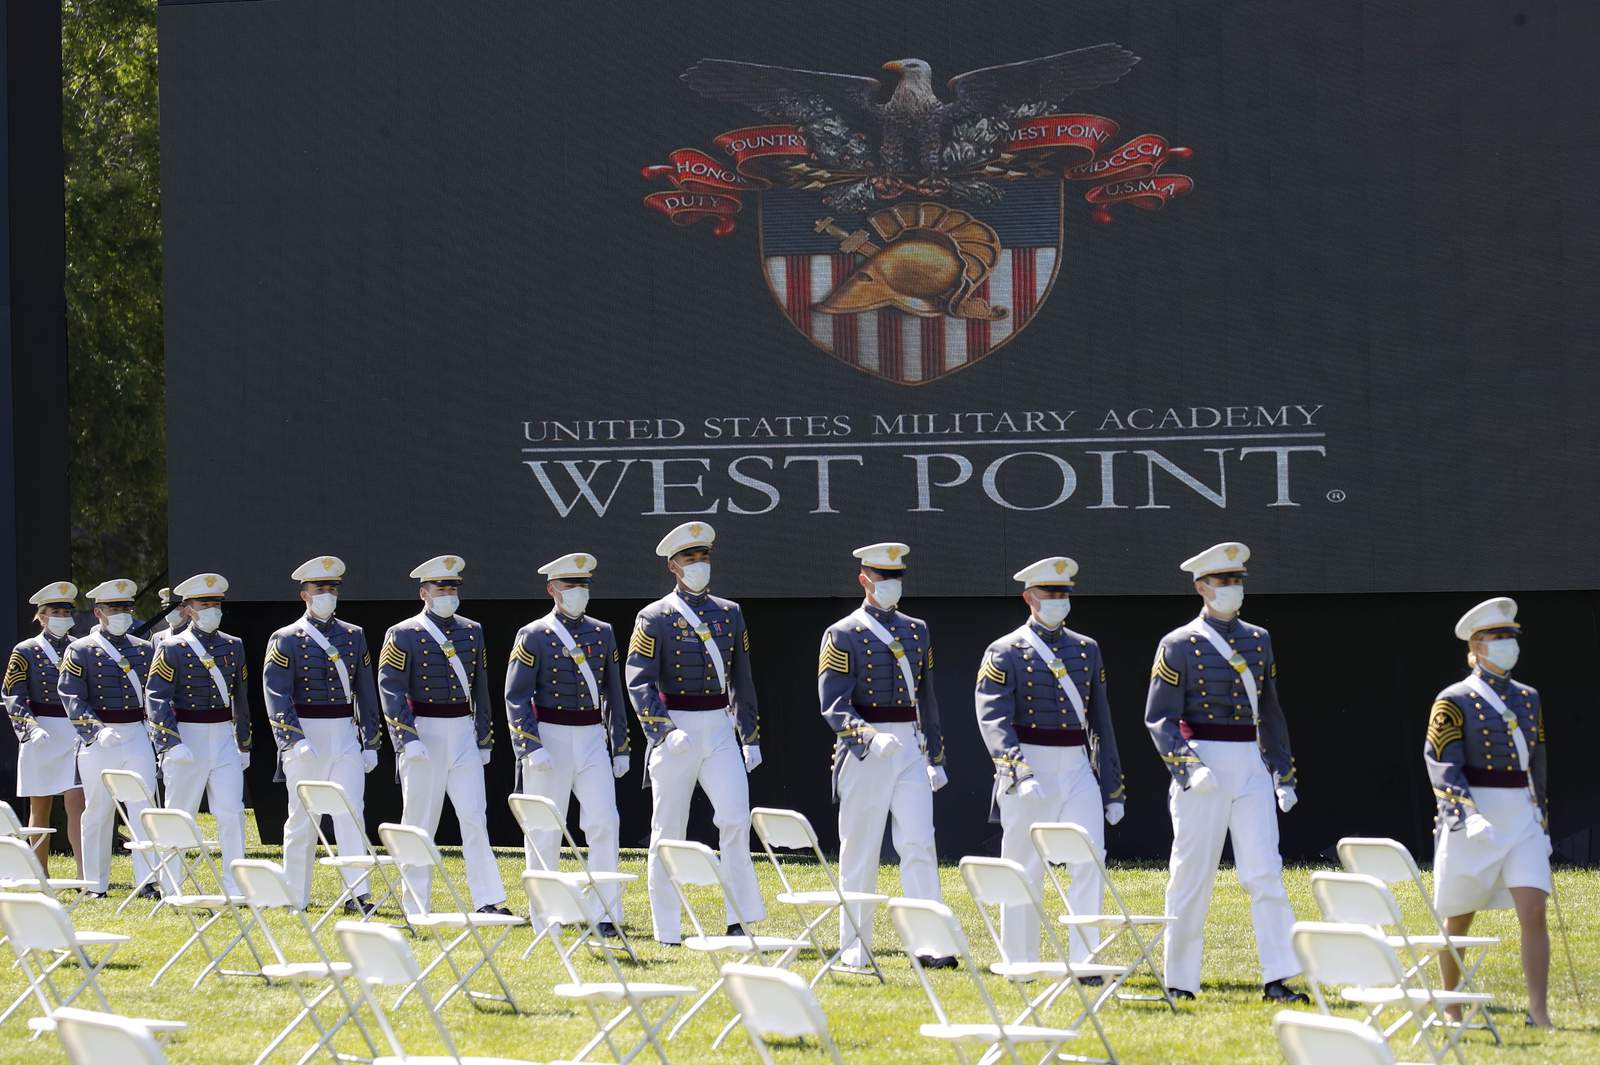 51 West Point cadets caught cheating must repeat a year